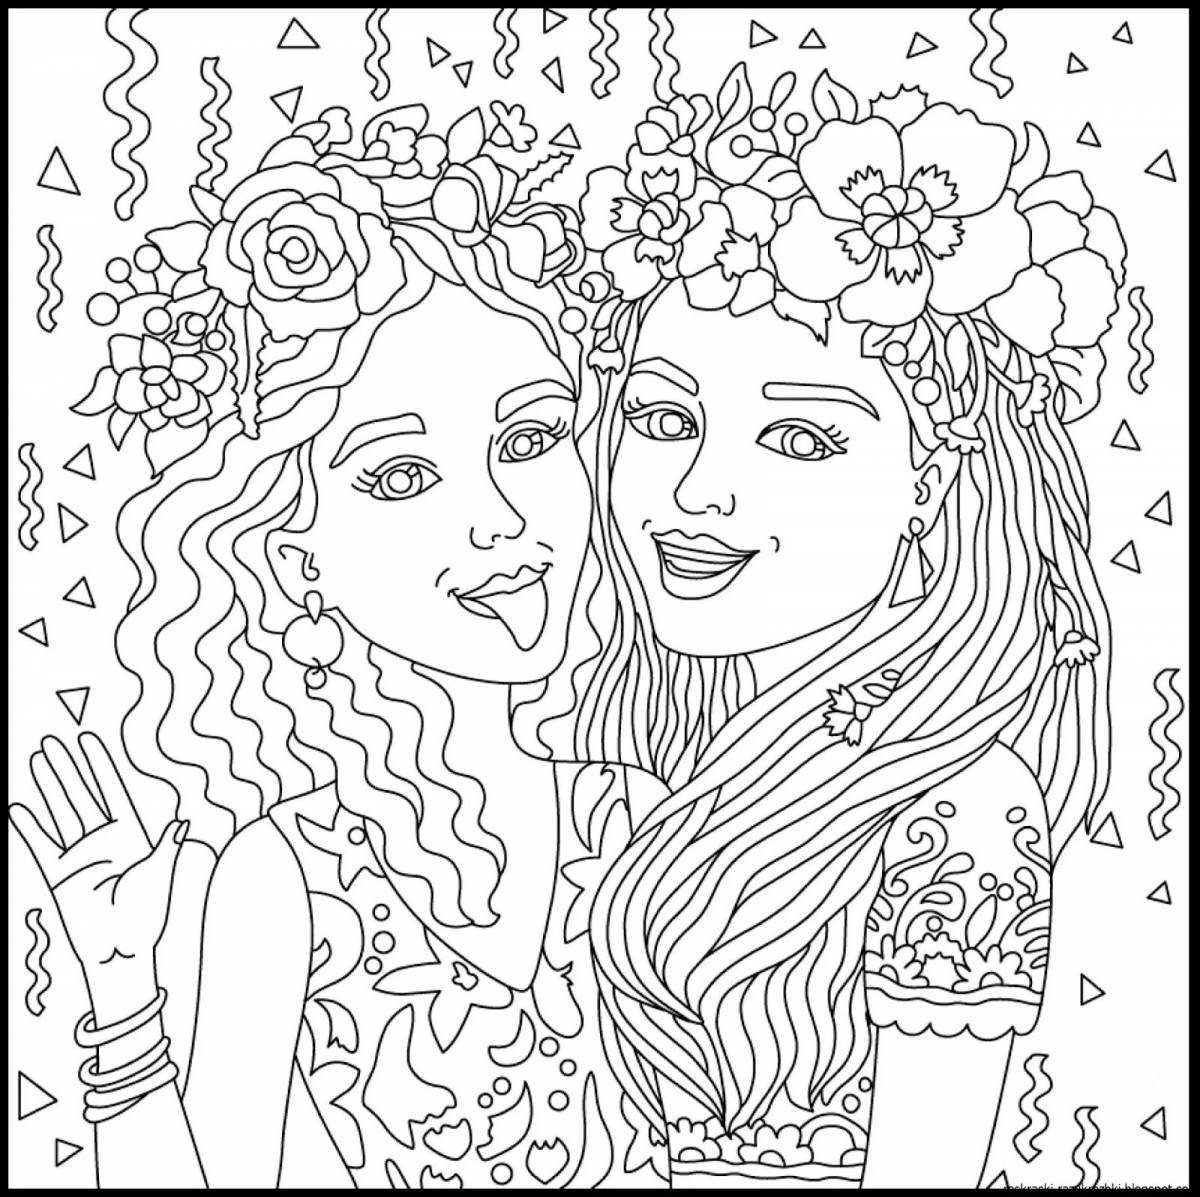 Luminous coloring book for girls 15 years old